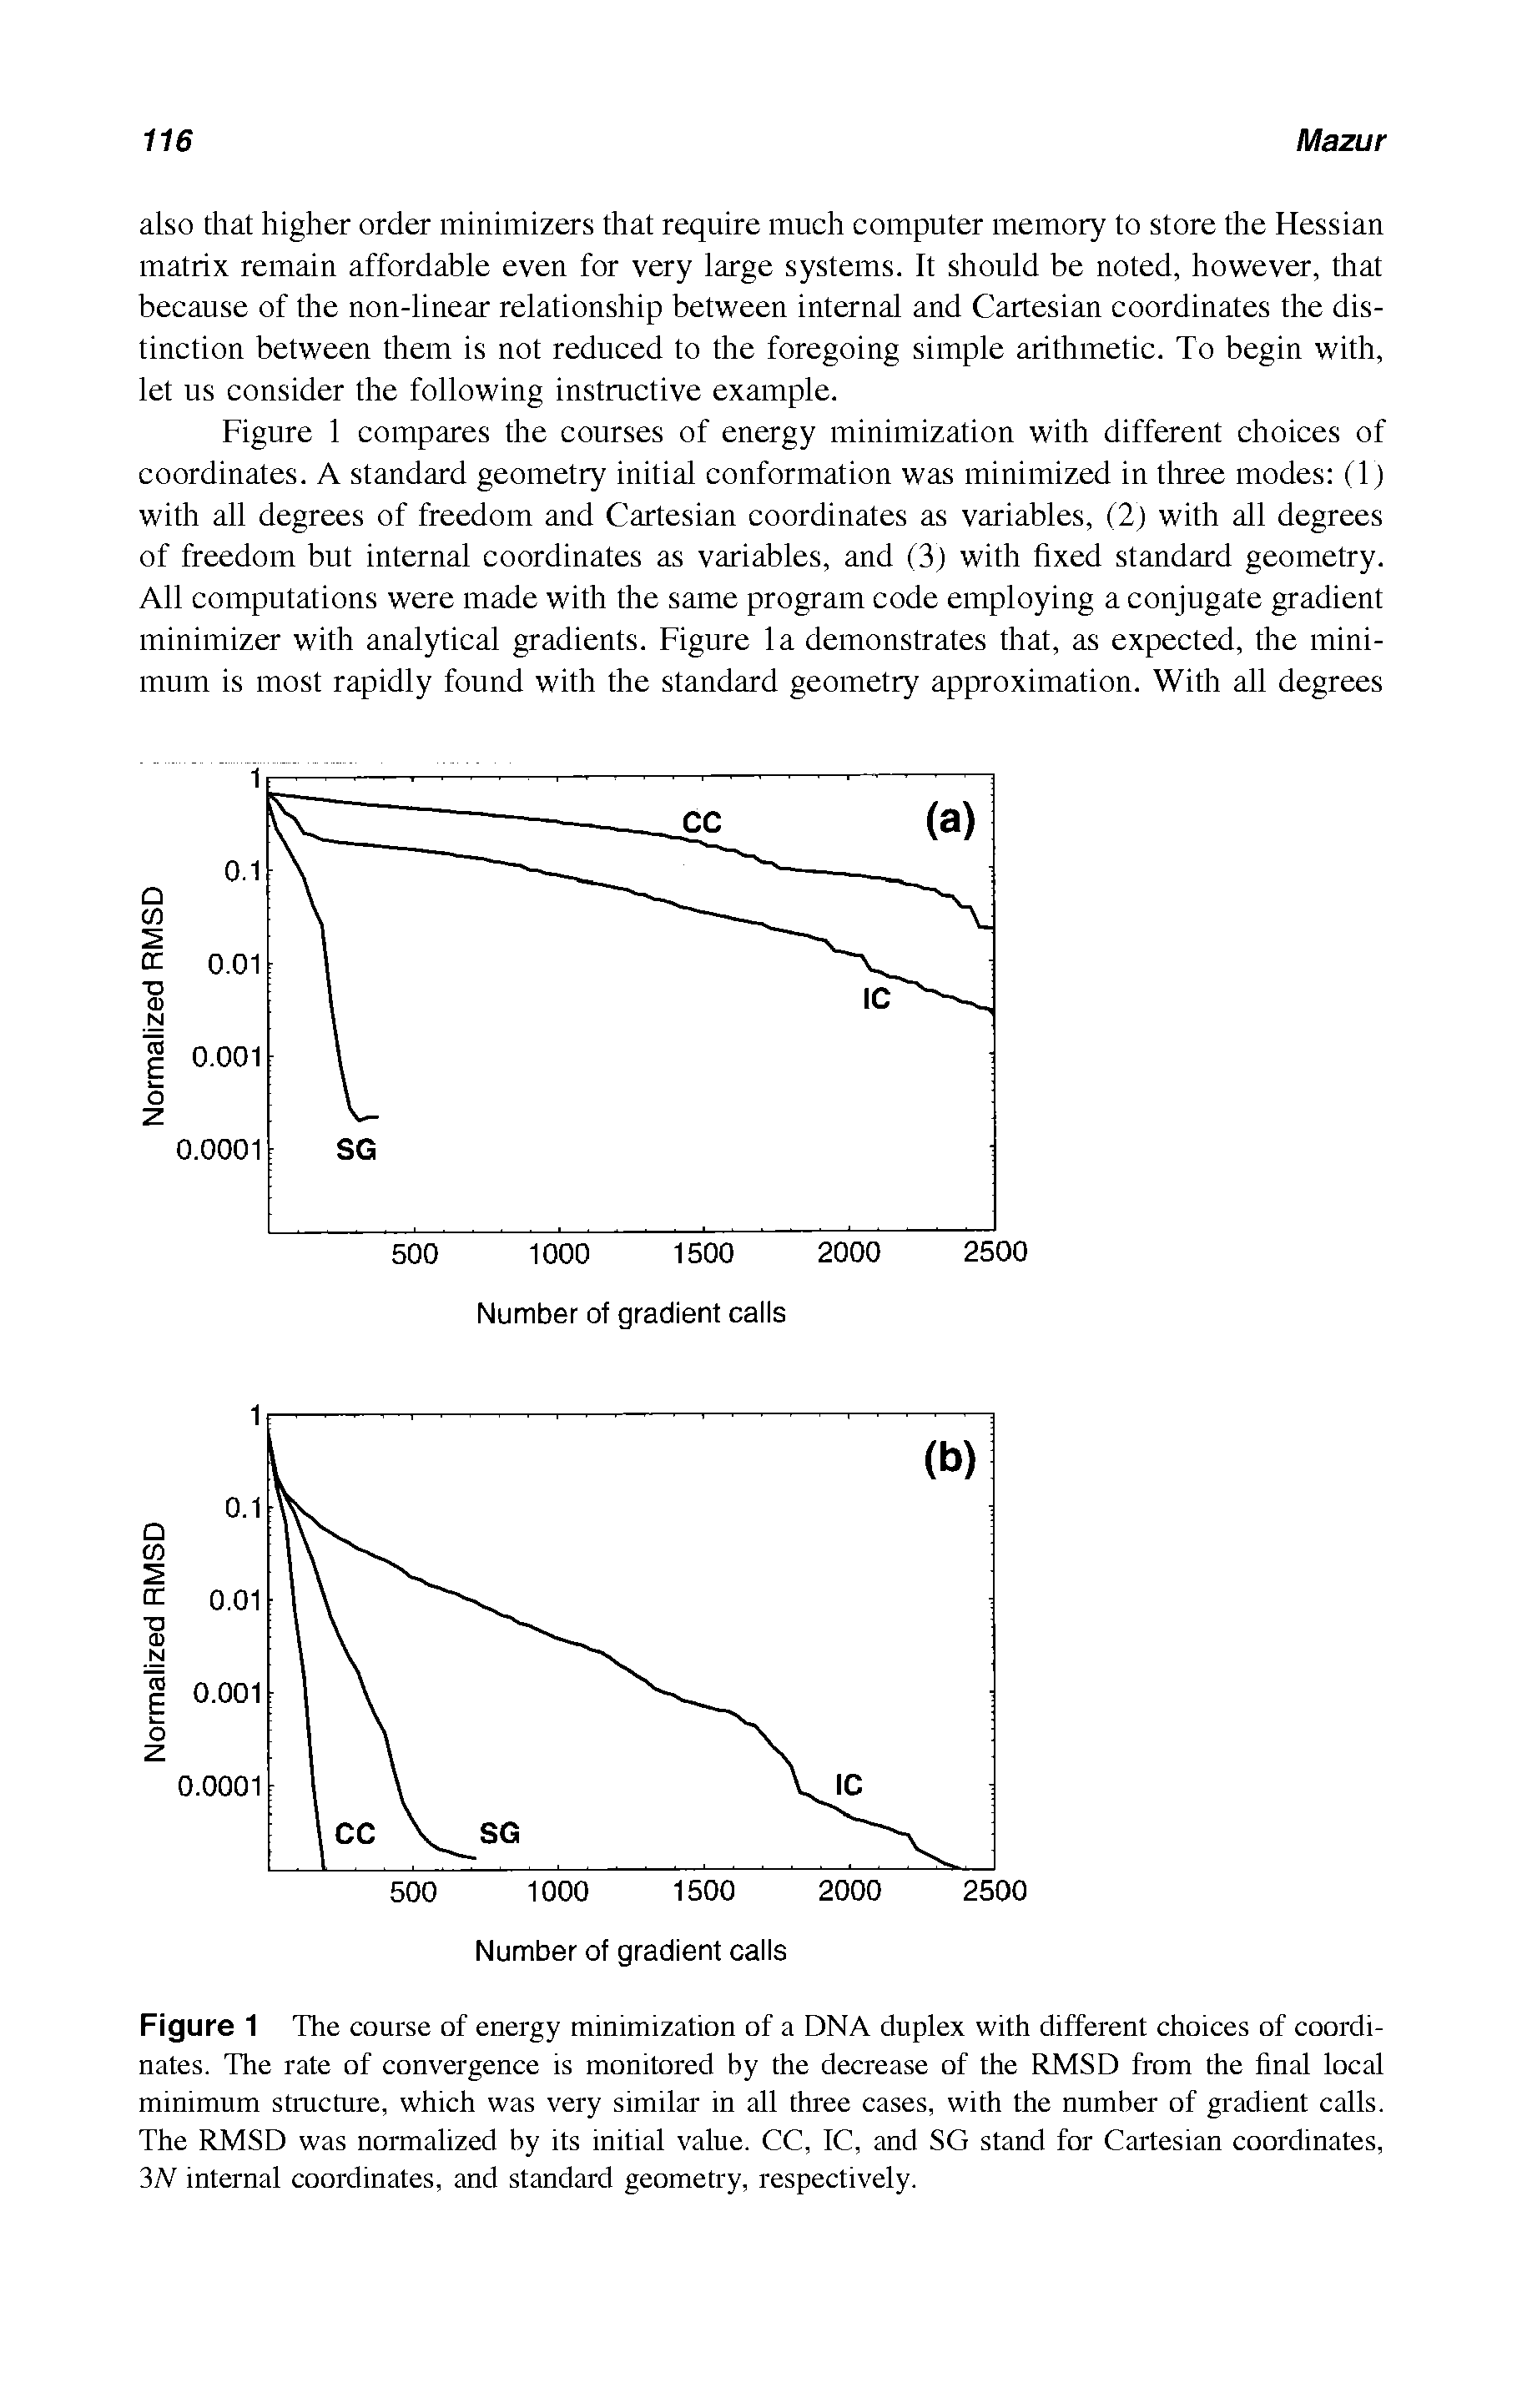 Figure 1 The course of energy minimization of a DNA duplex with different choices of coordinates. The rate of convergence is monitored by the decrease of the RMSD from the final local minimum structure, which was very similar in all three cases, with the number of gradient calls. The RMSD was normalized by its initial value. CC, IC, and SG stand for Cartesian coordinates, 3N internal coordinates, and standard geometry, respectively.